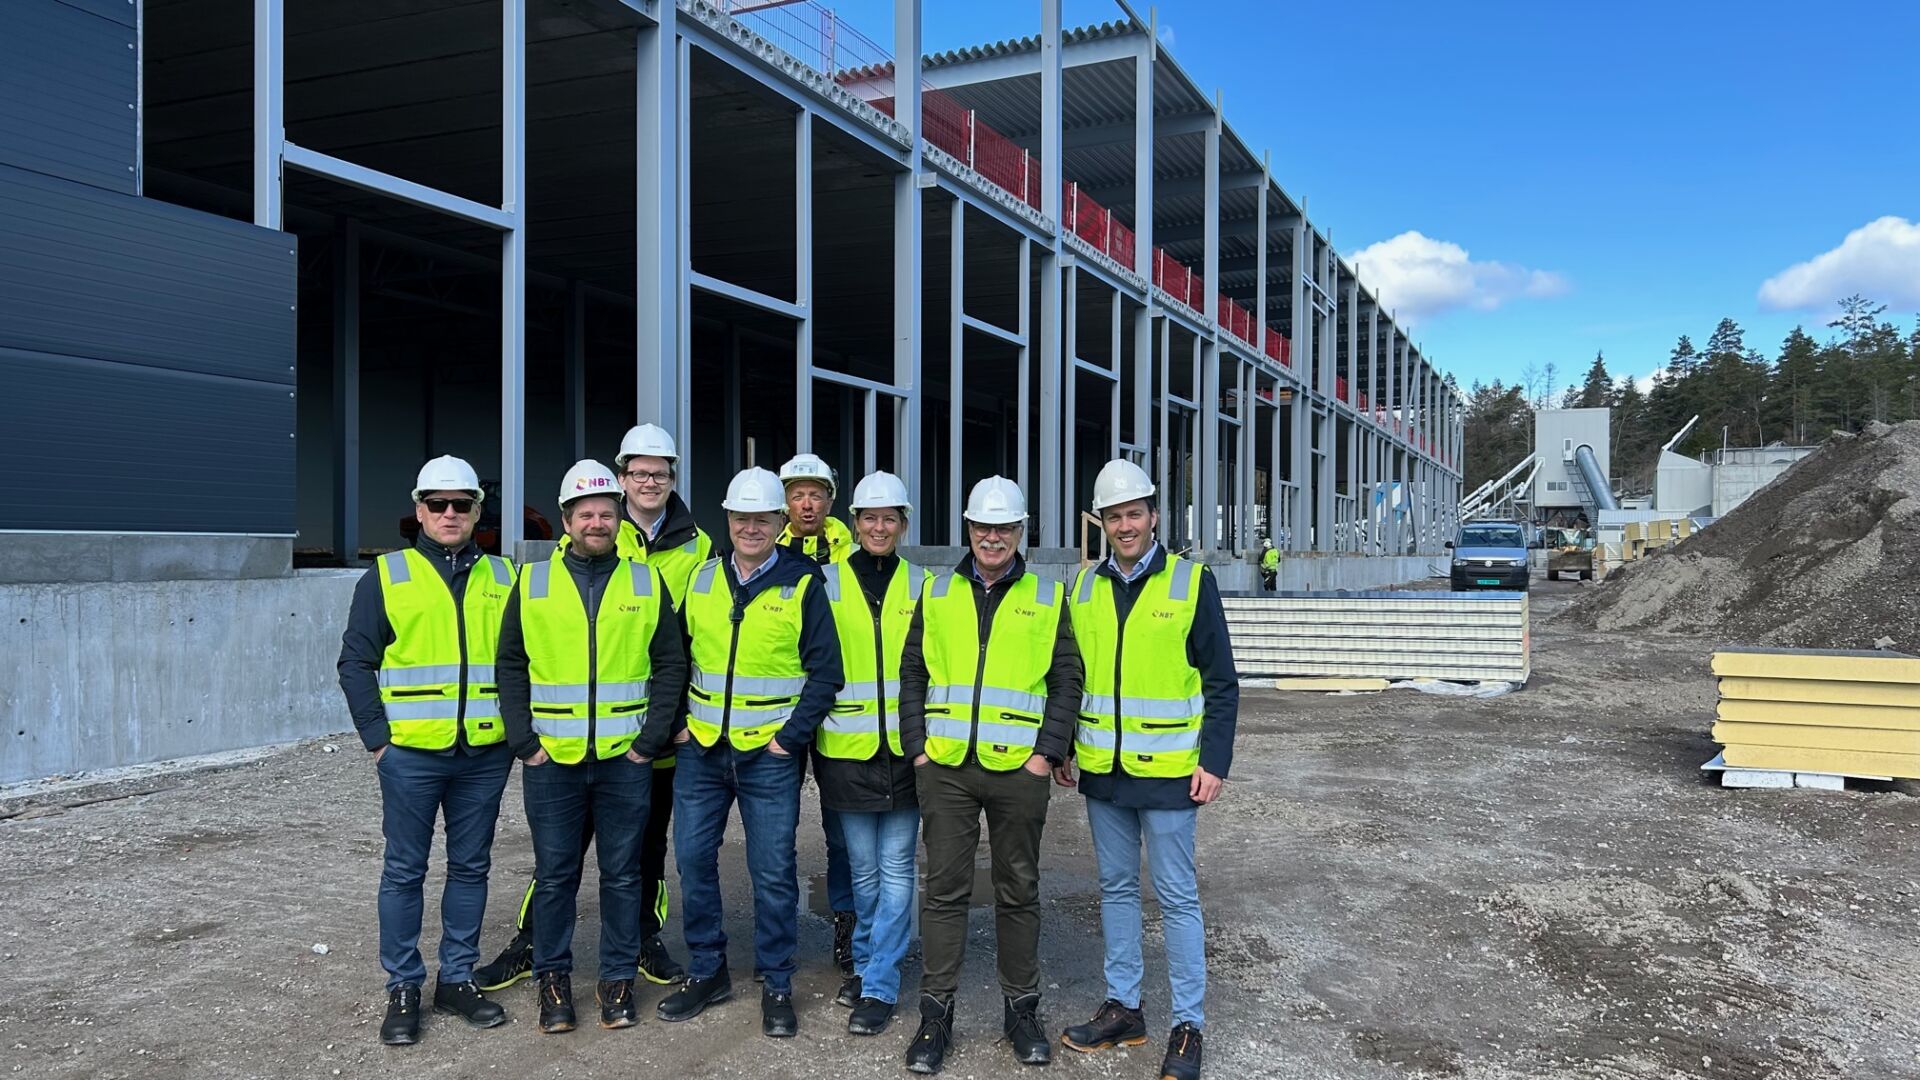 A group of people wearing security jackets and helmets in front of a construction building